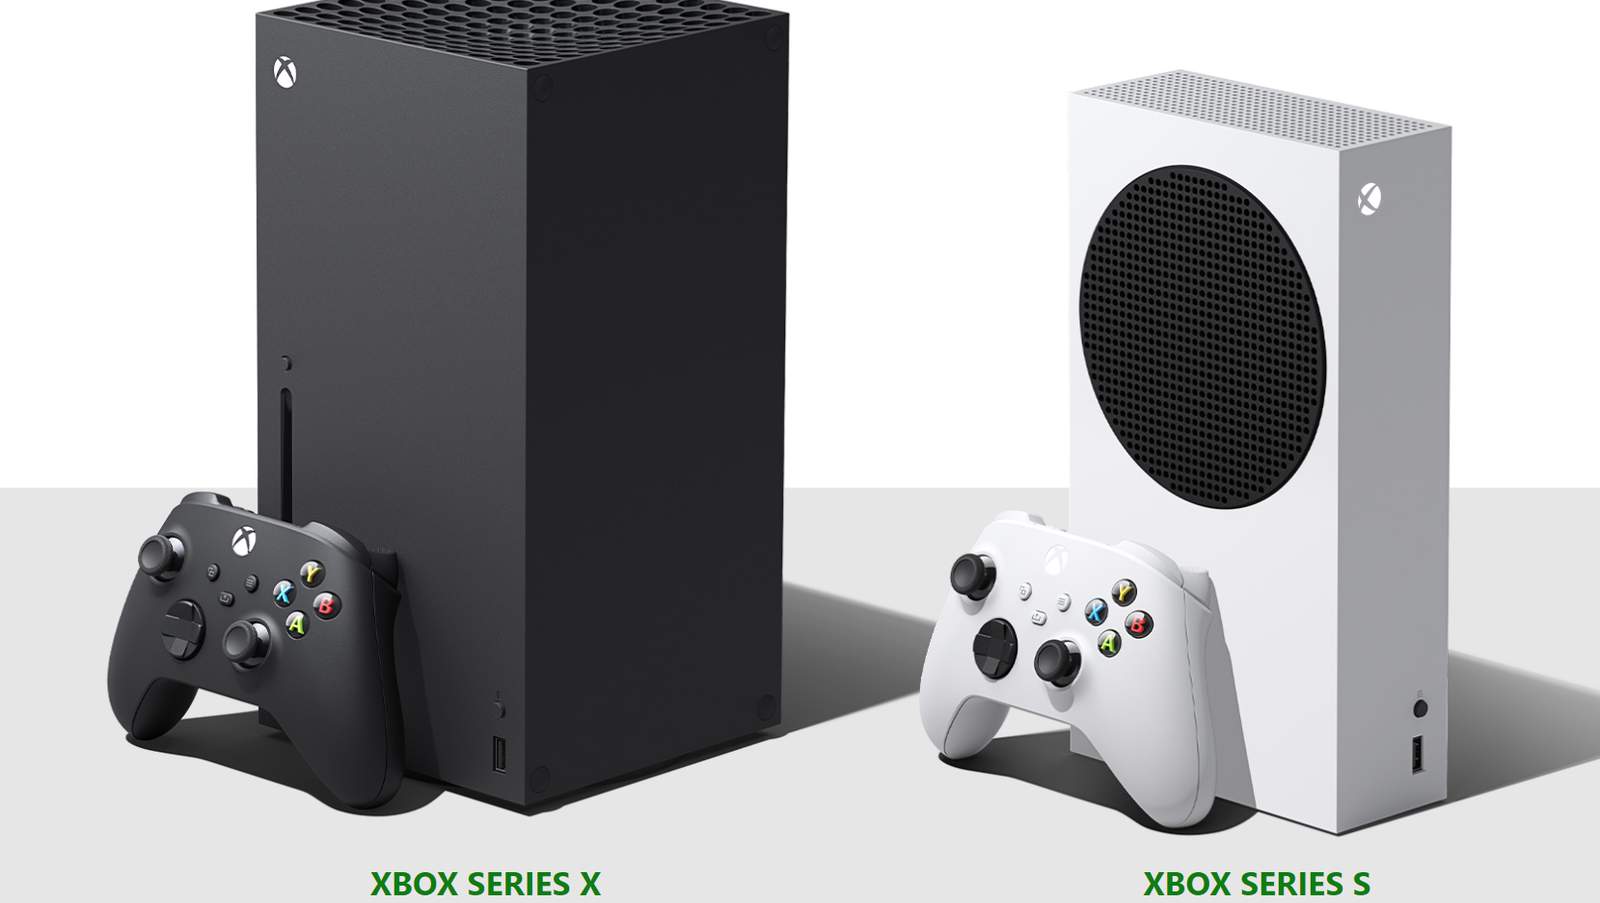 New Xbox consoles arriving just in time for the holidays